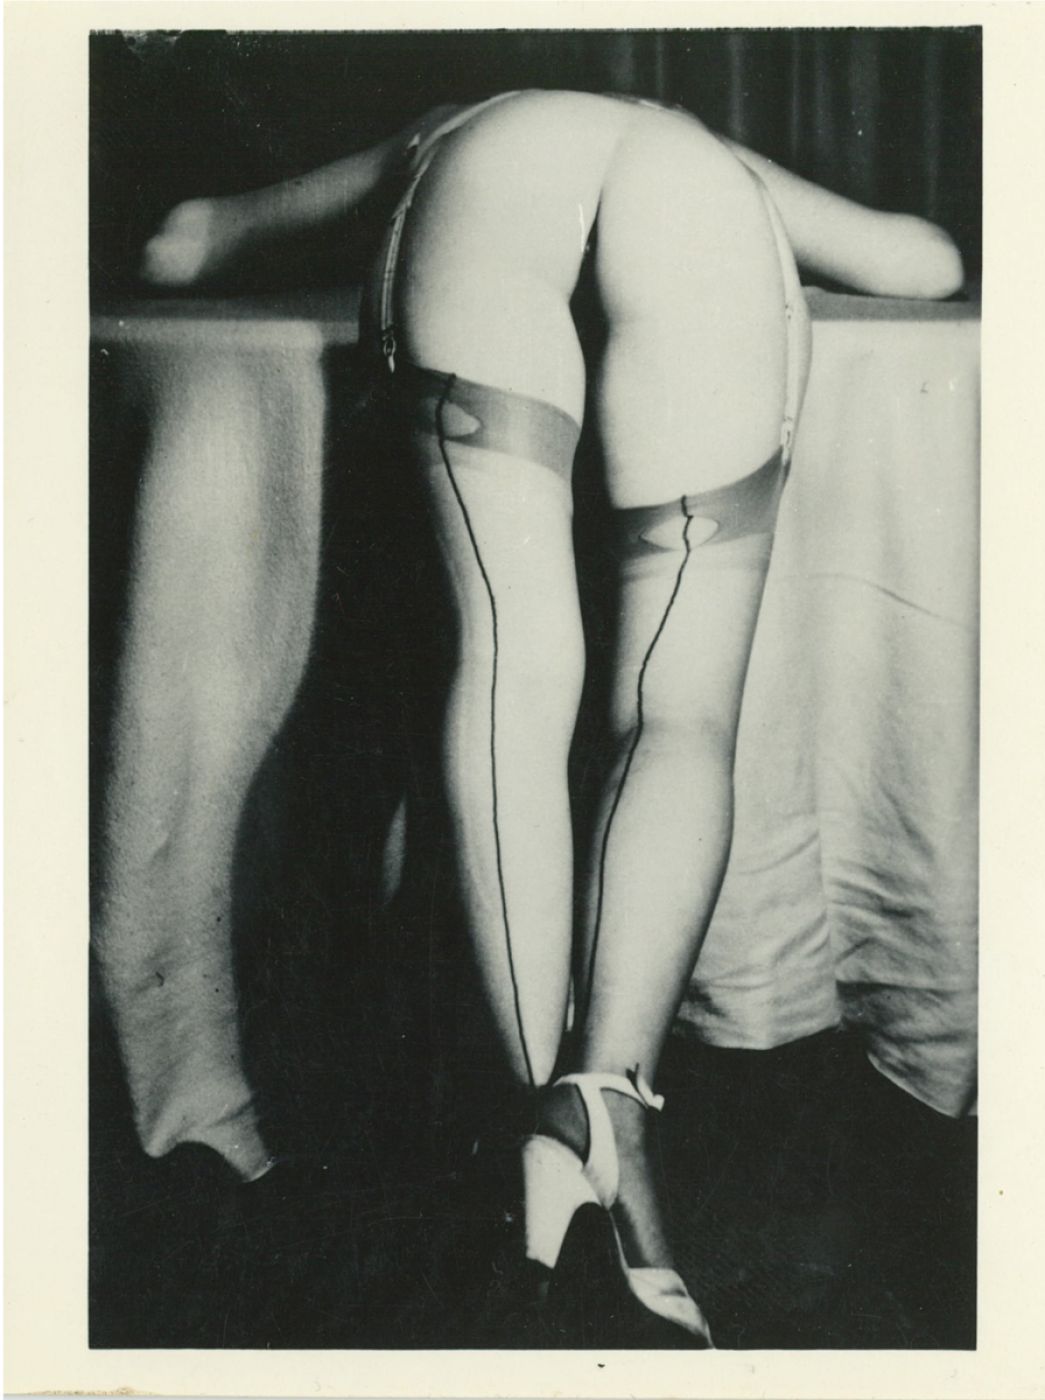 Anonymous, “Untitled”, 1930 ca.